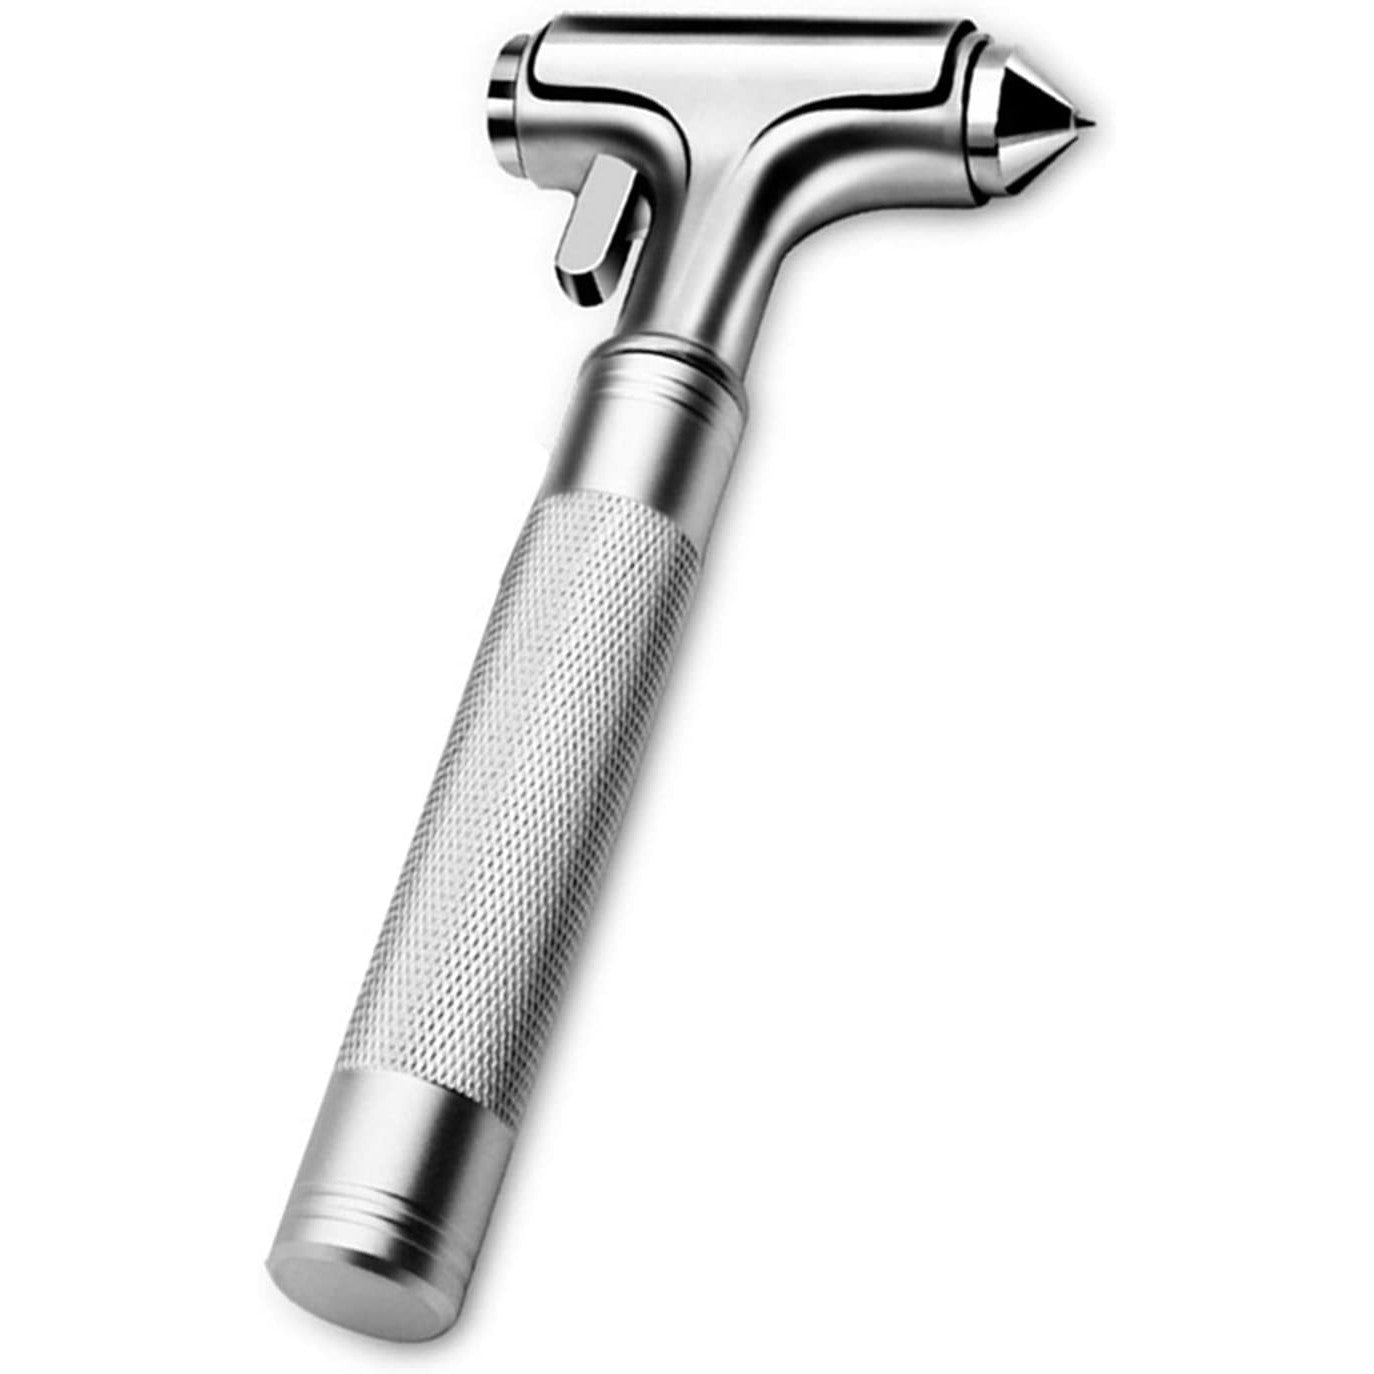 A silver colored hammer looking tool which is an emergency glass breaker and seat belt cutter for use in a car accident.